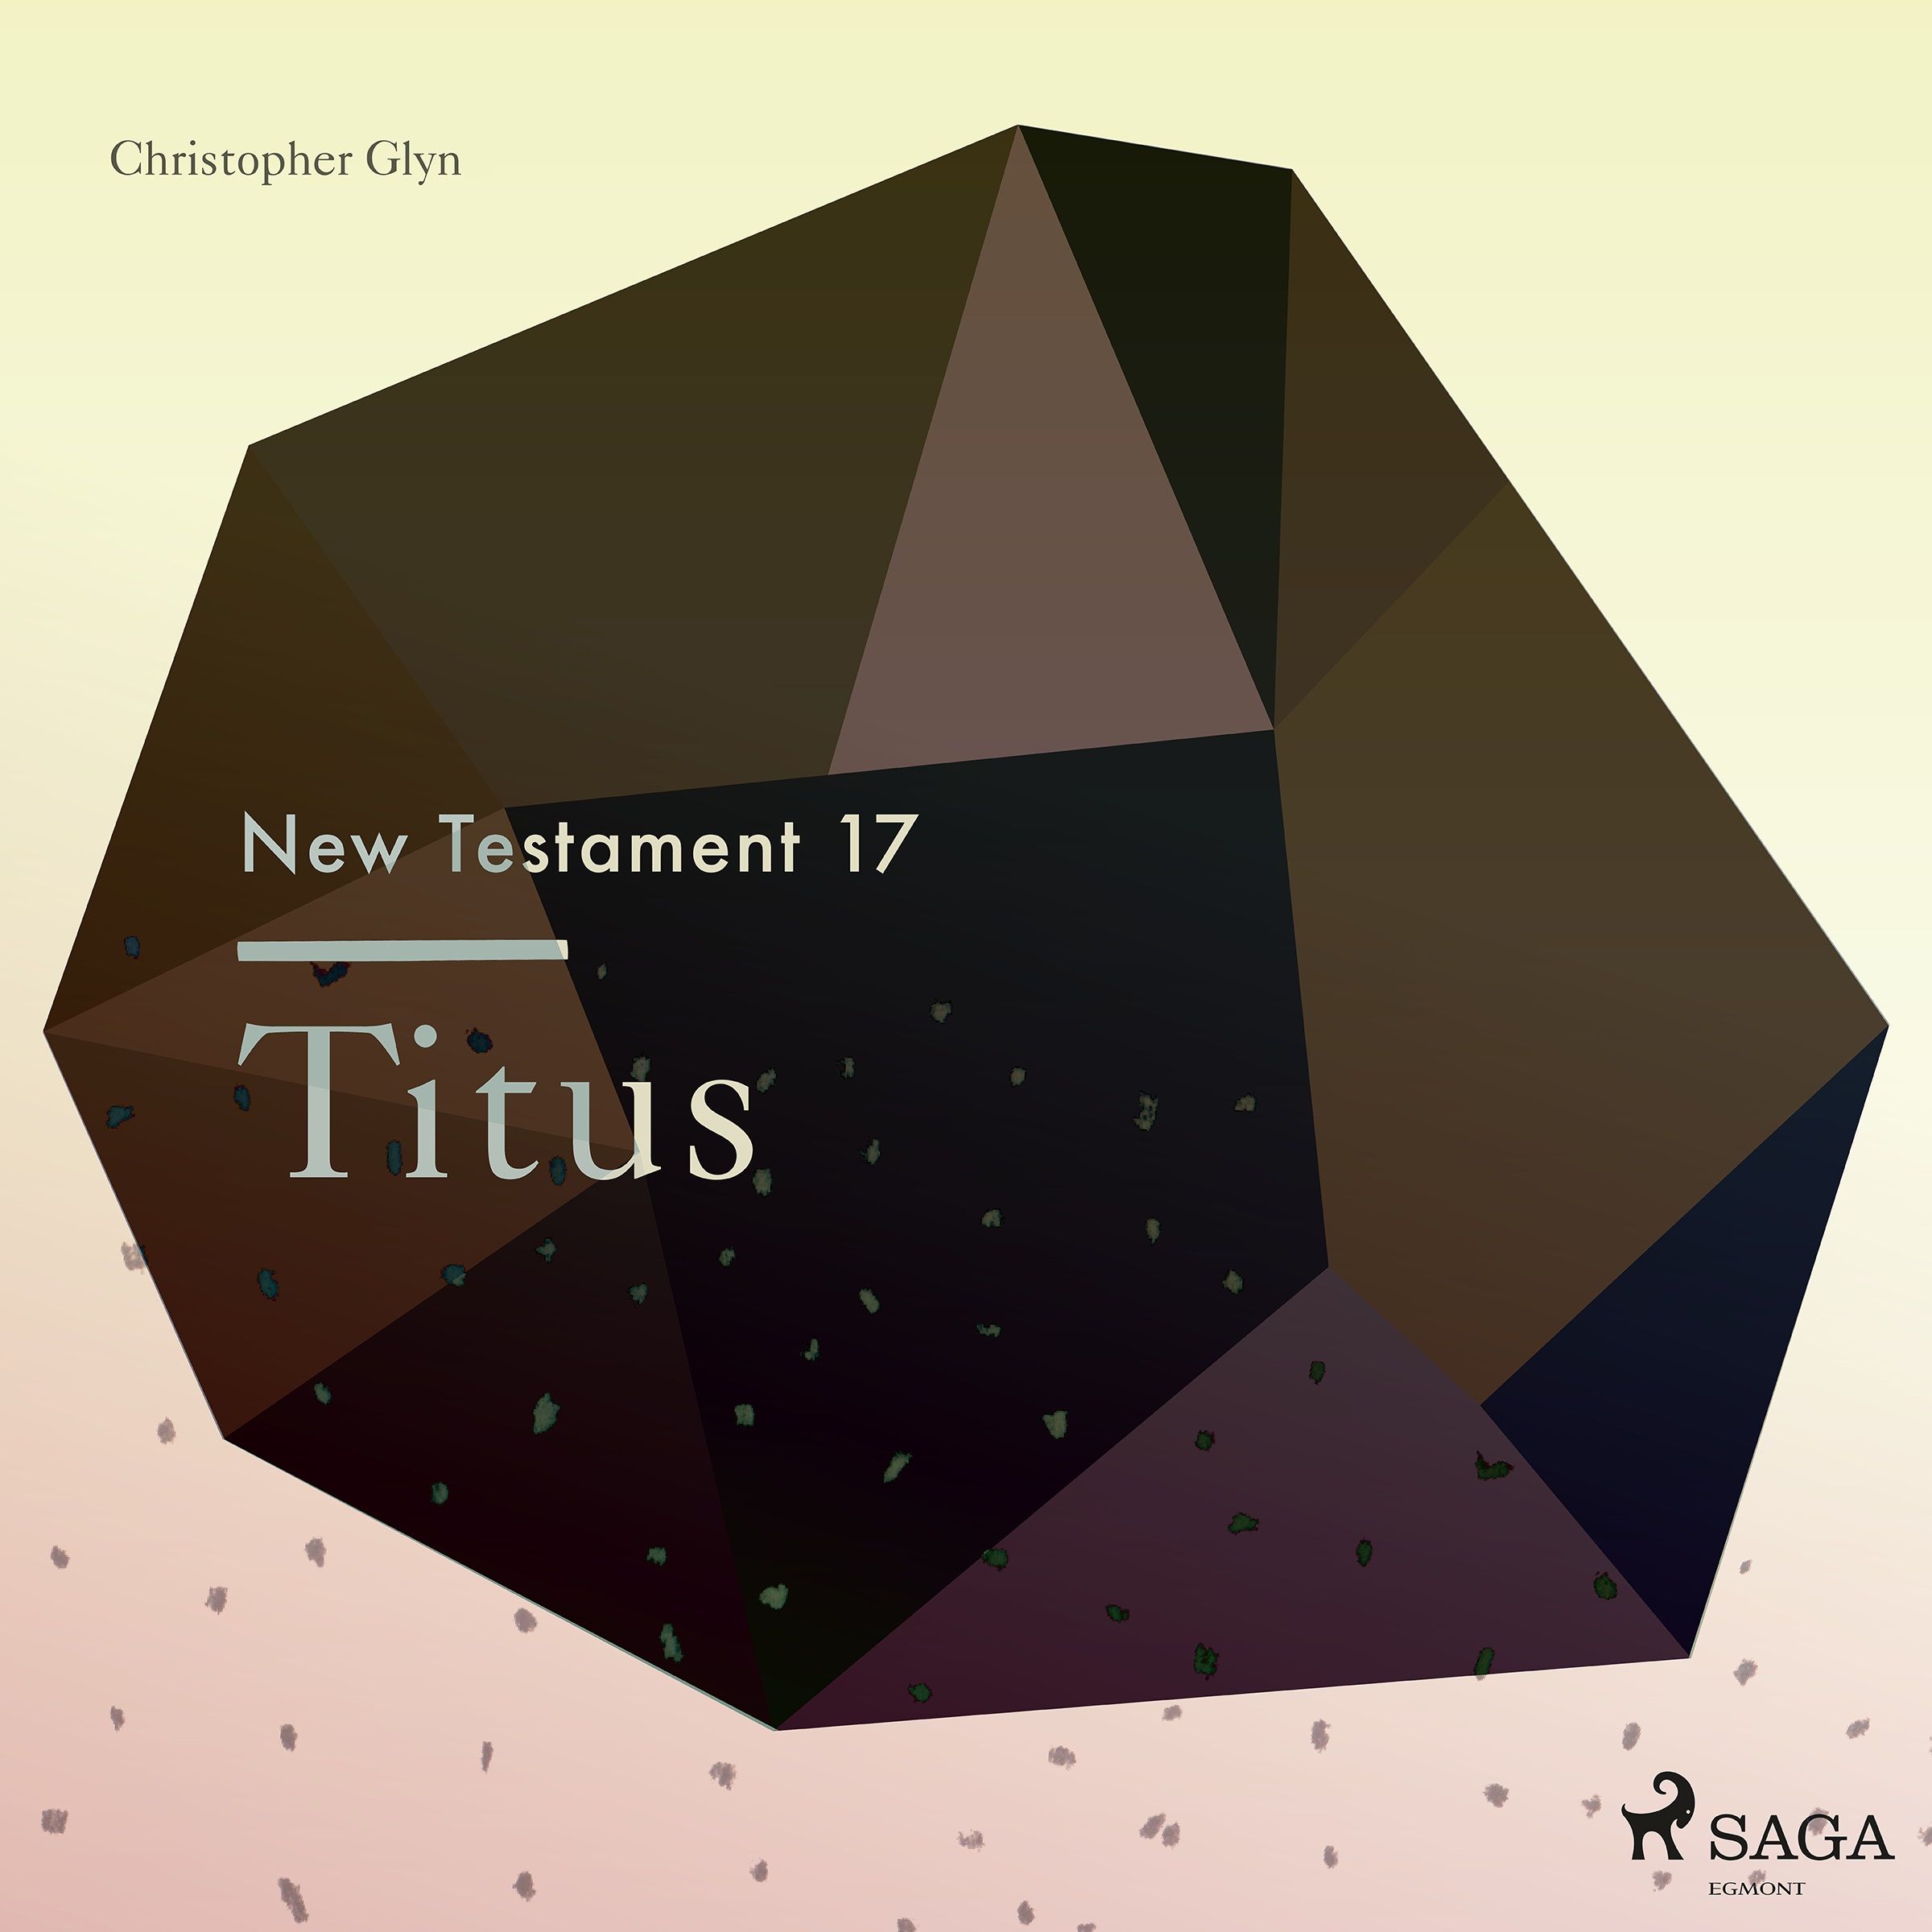 The New Testament 17 - Titus, audiobook by Christopher Glyn